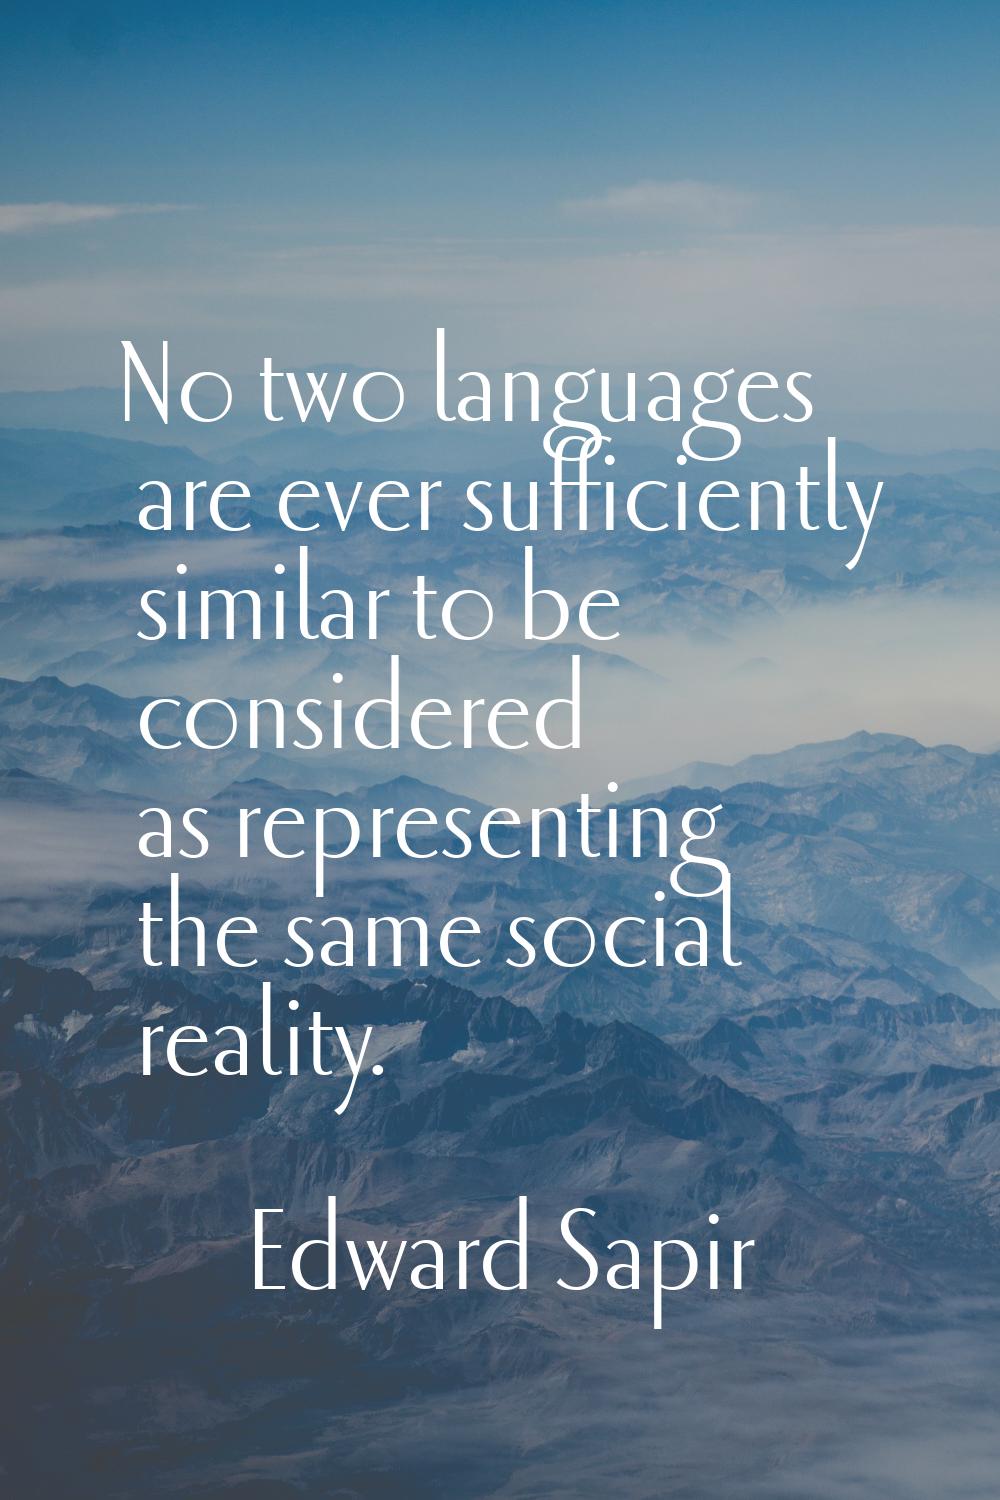 No two languages are ever sufficiently similar to be considered as representing the same social rea